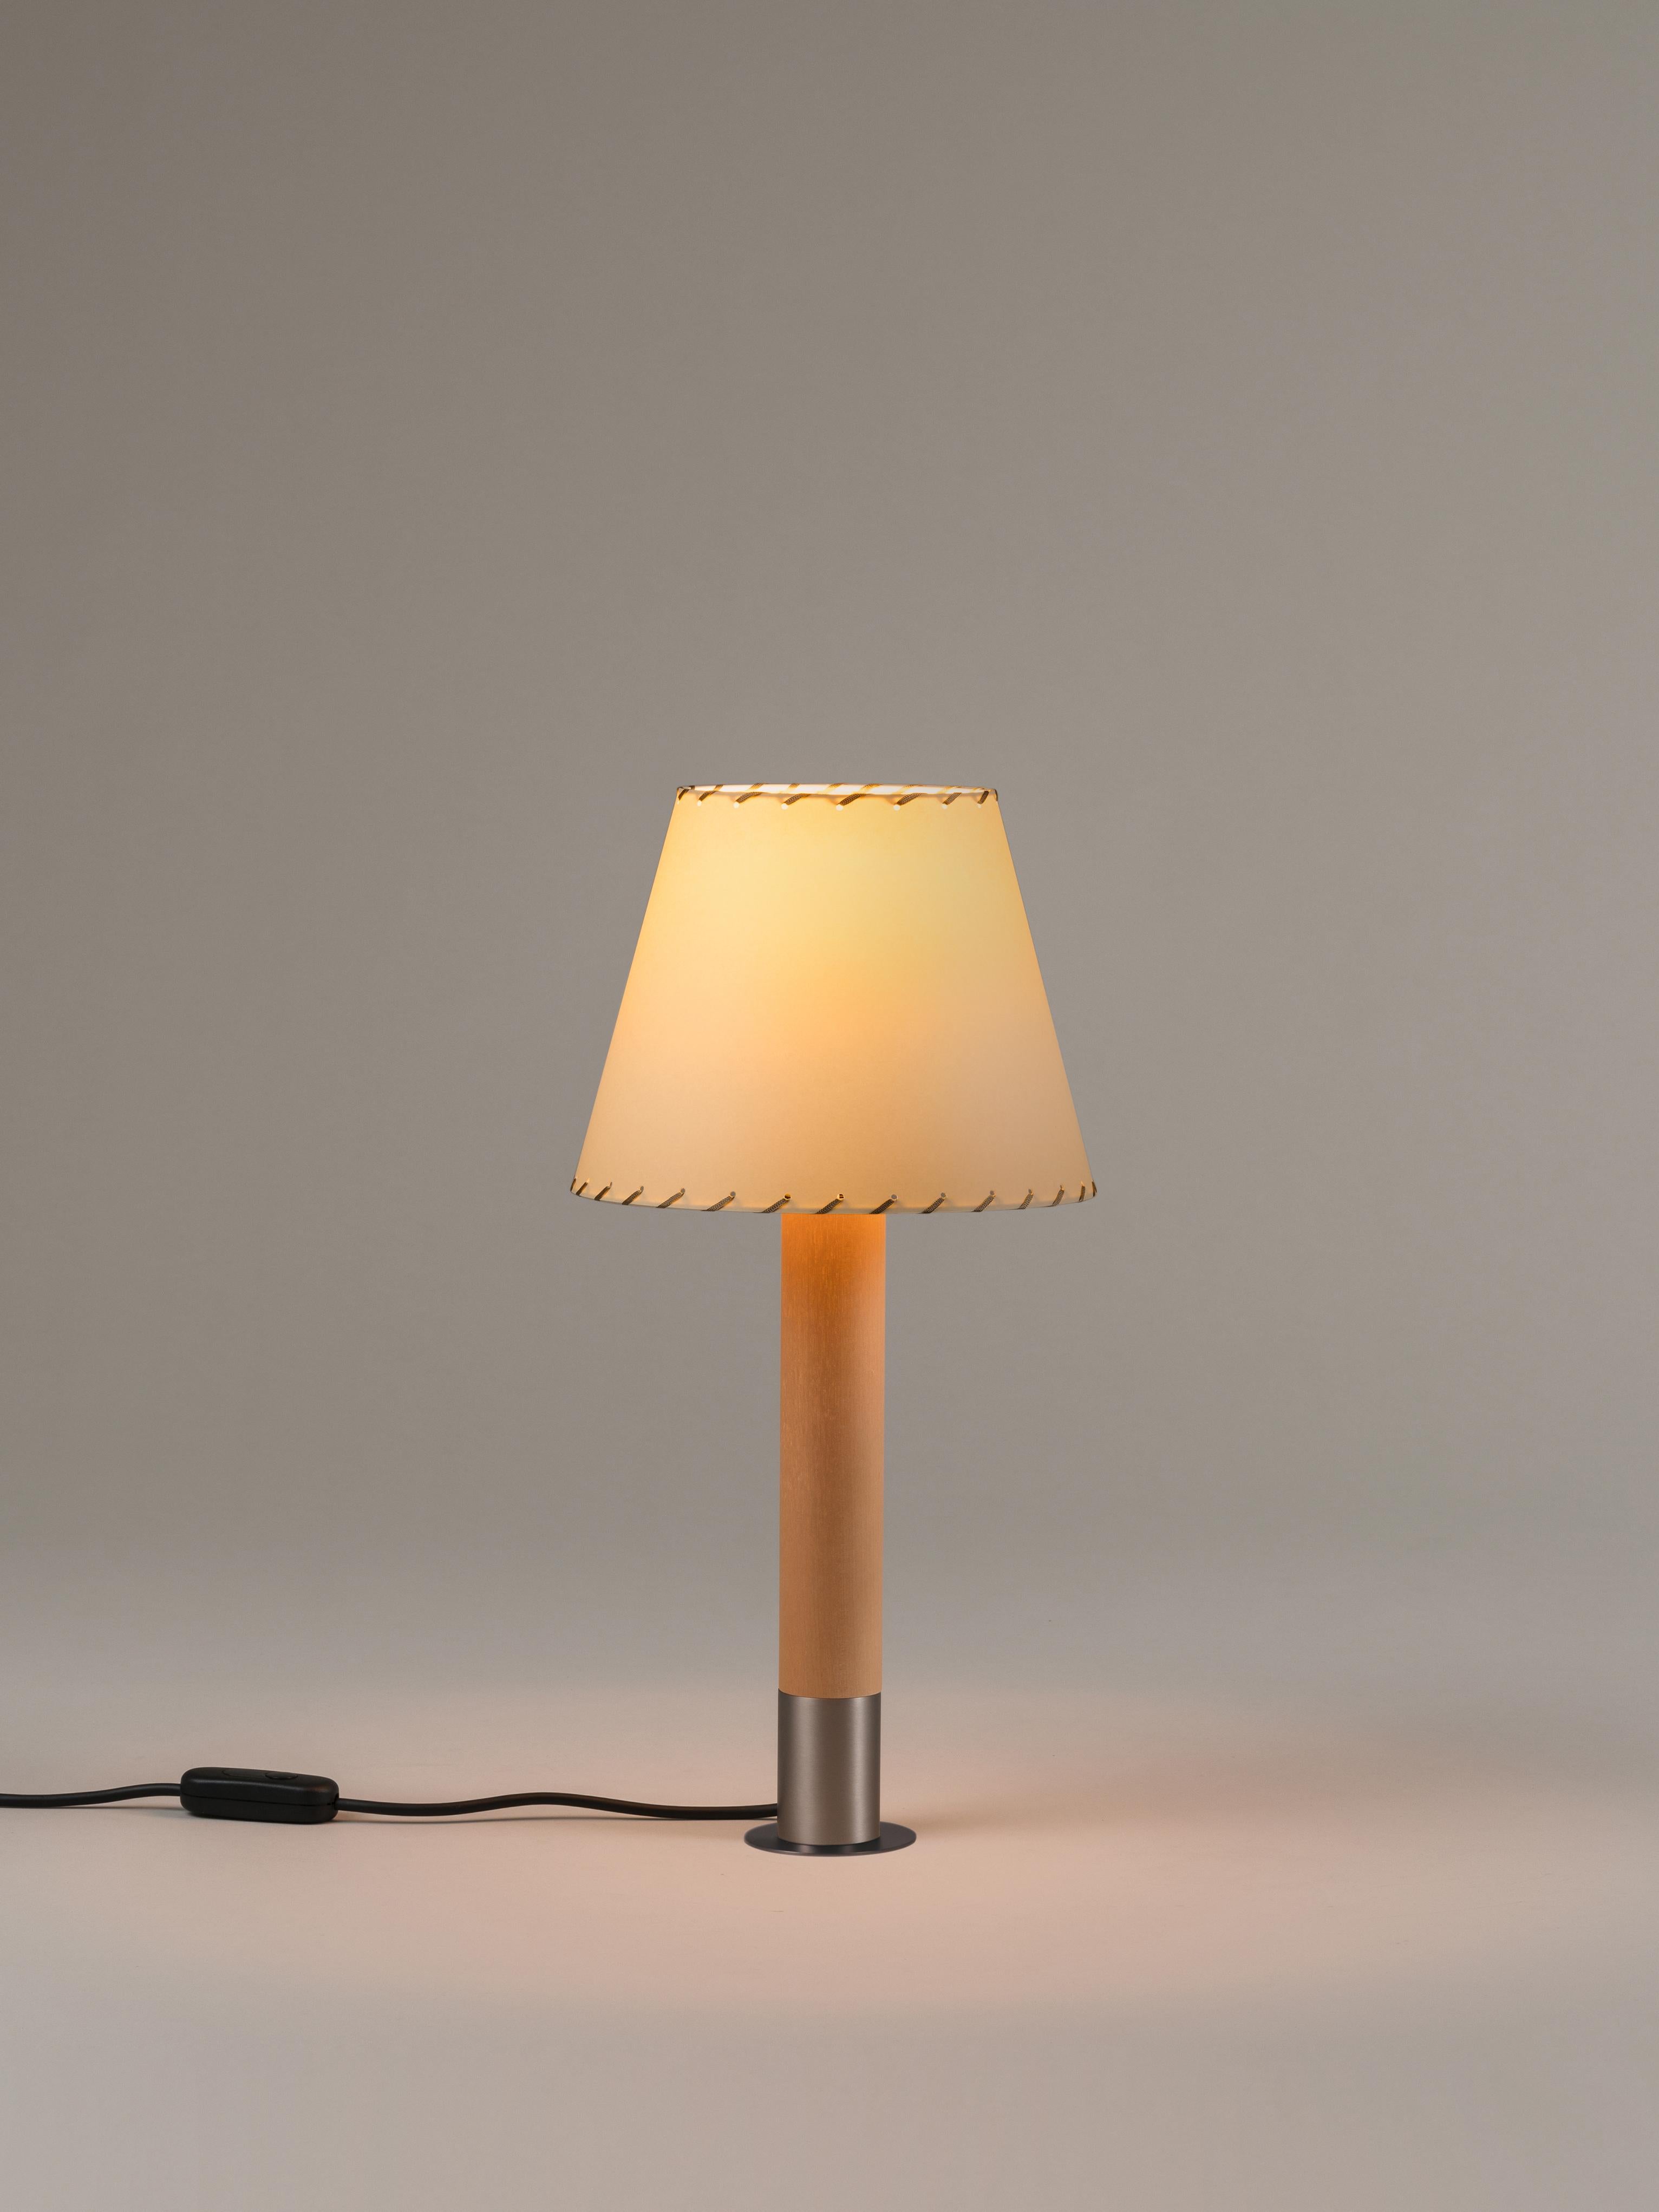 Nickel and Beige Básica M1 table lamp by Santiago Roqueta, Santa & Cole.
Dimensions: D 25 x H 52 cm
Materials: Nickel, birch wood, paperboard.
Available in other shade colors and with or without the stabilizing disc.
Available in nickel or